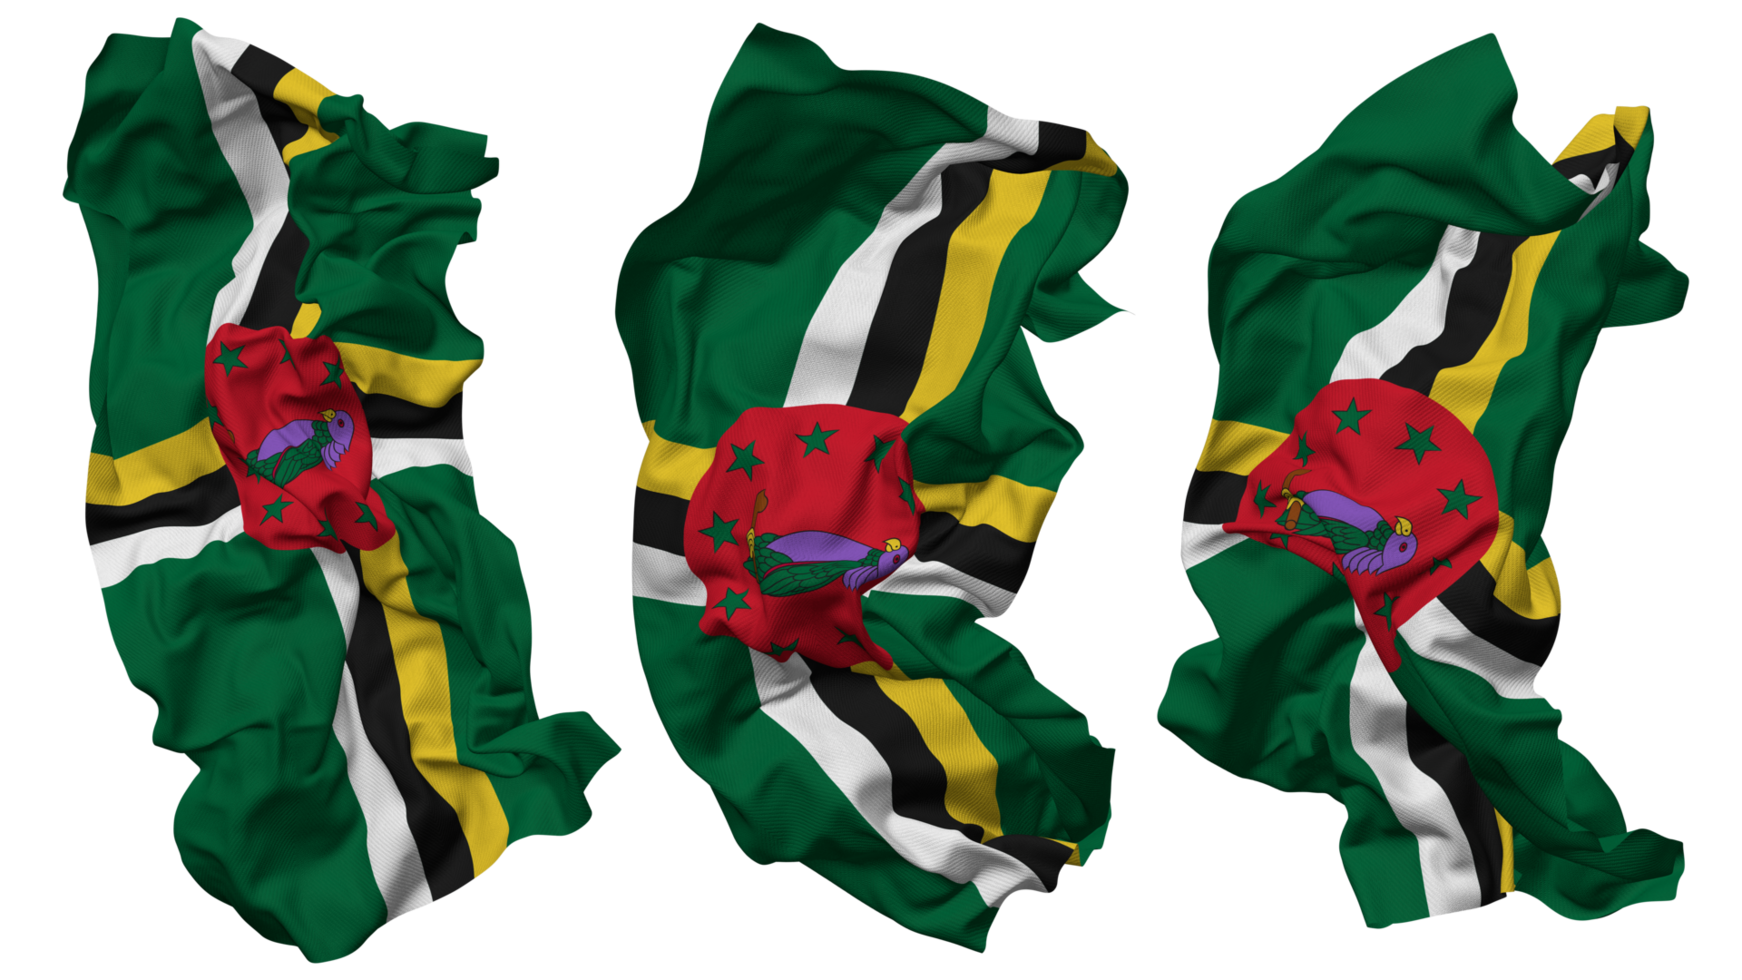 Dominica Flag Waves Isolated in Different Styles with Bump Texture, 3D Rendering png